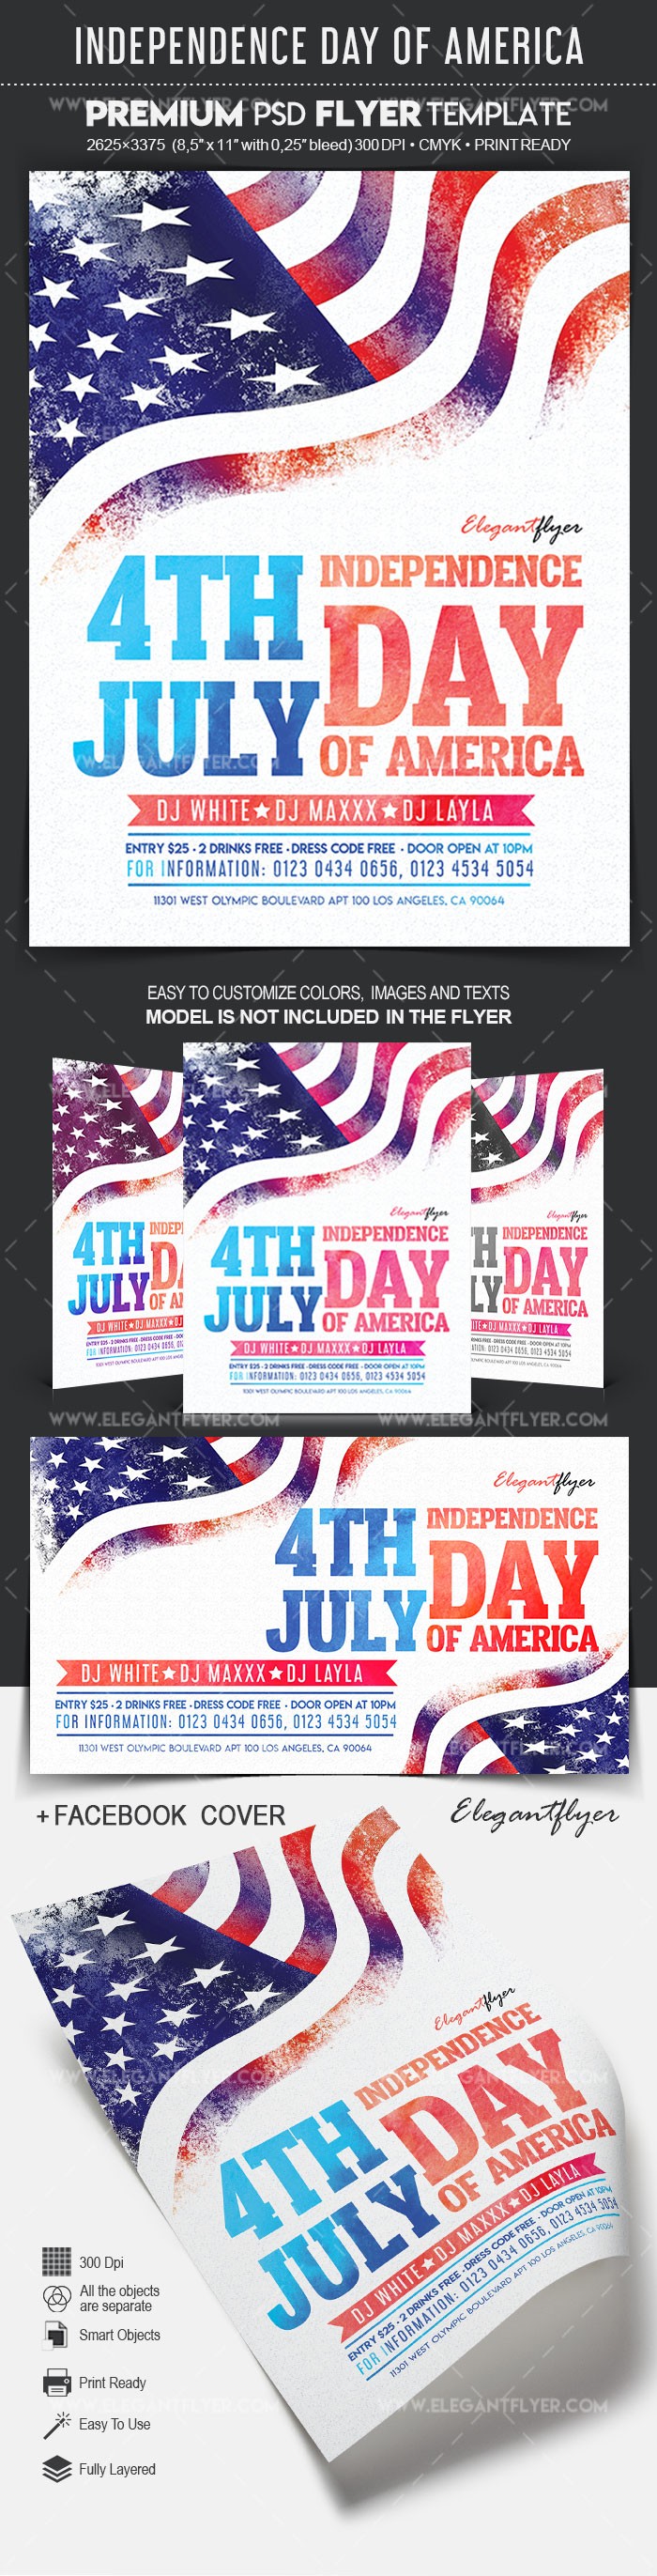 Independence Day of America by ElegantFlyer